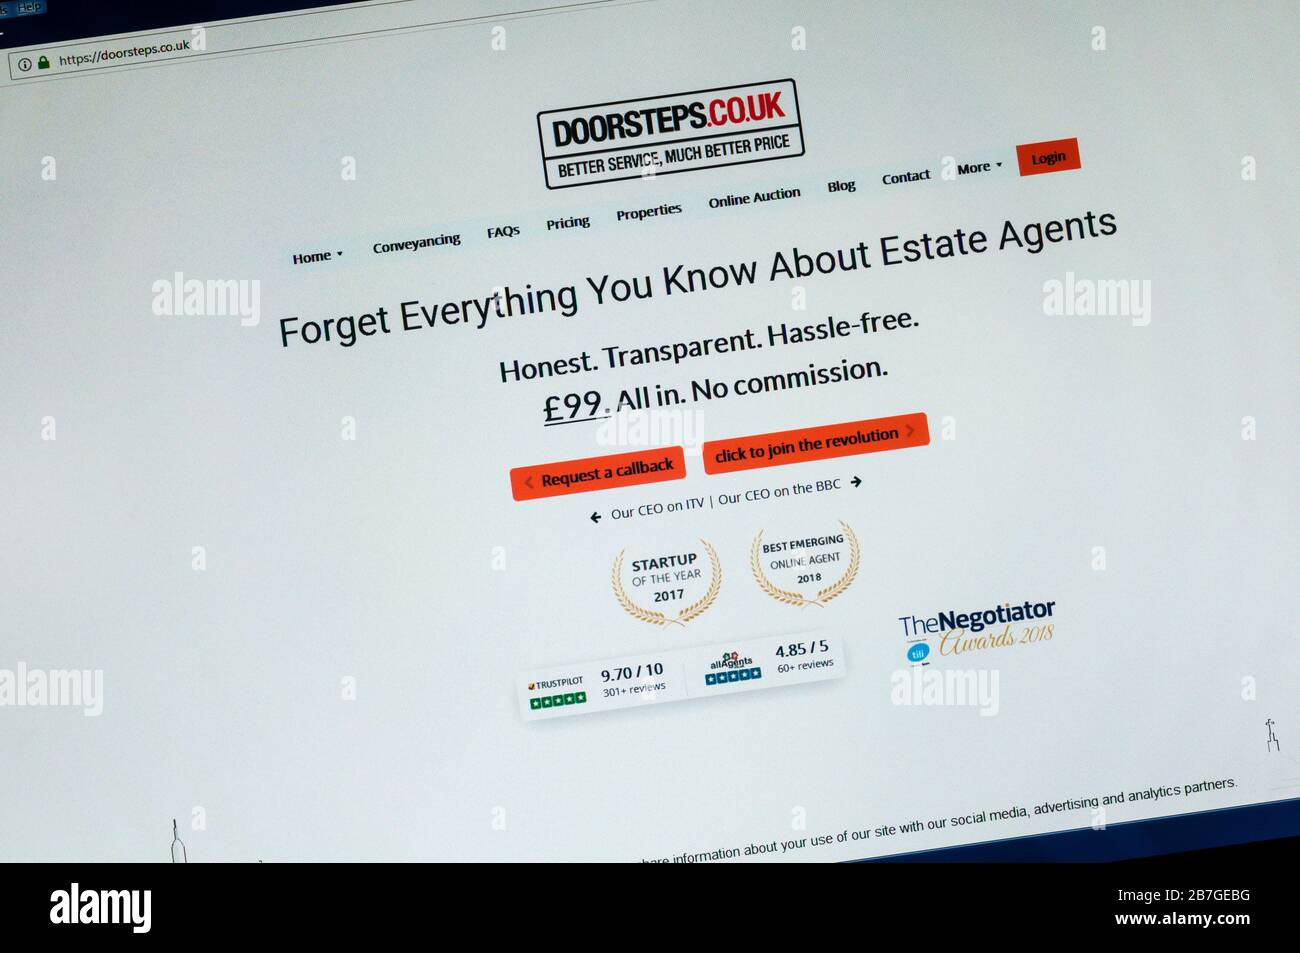 The home page of the website for the Online Estate Agents Doorsteps.co.uk. Stock Photo